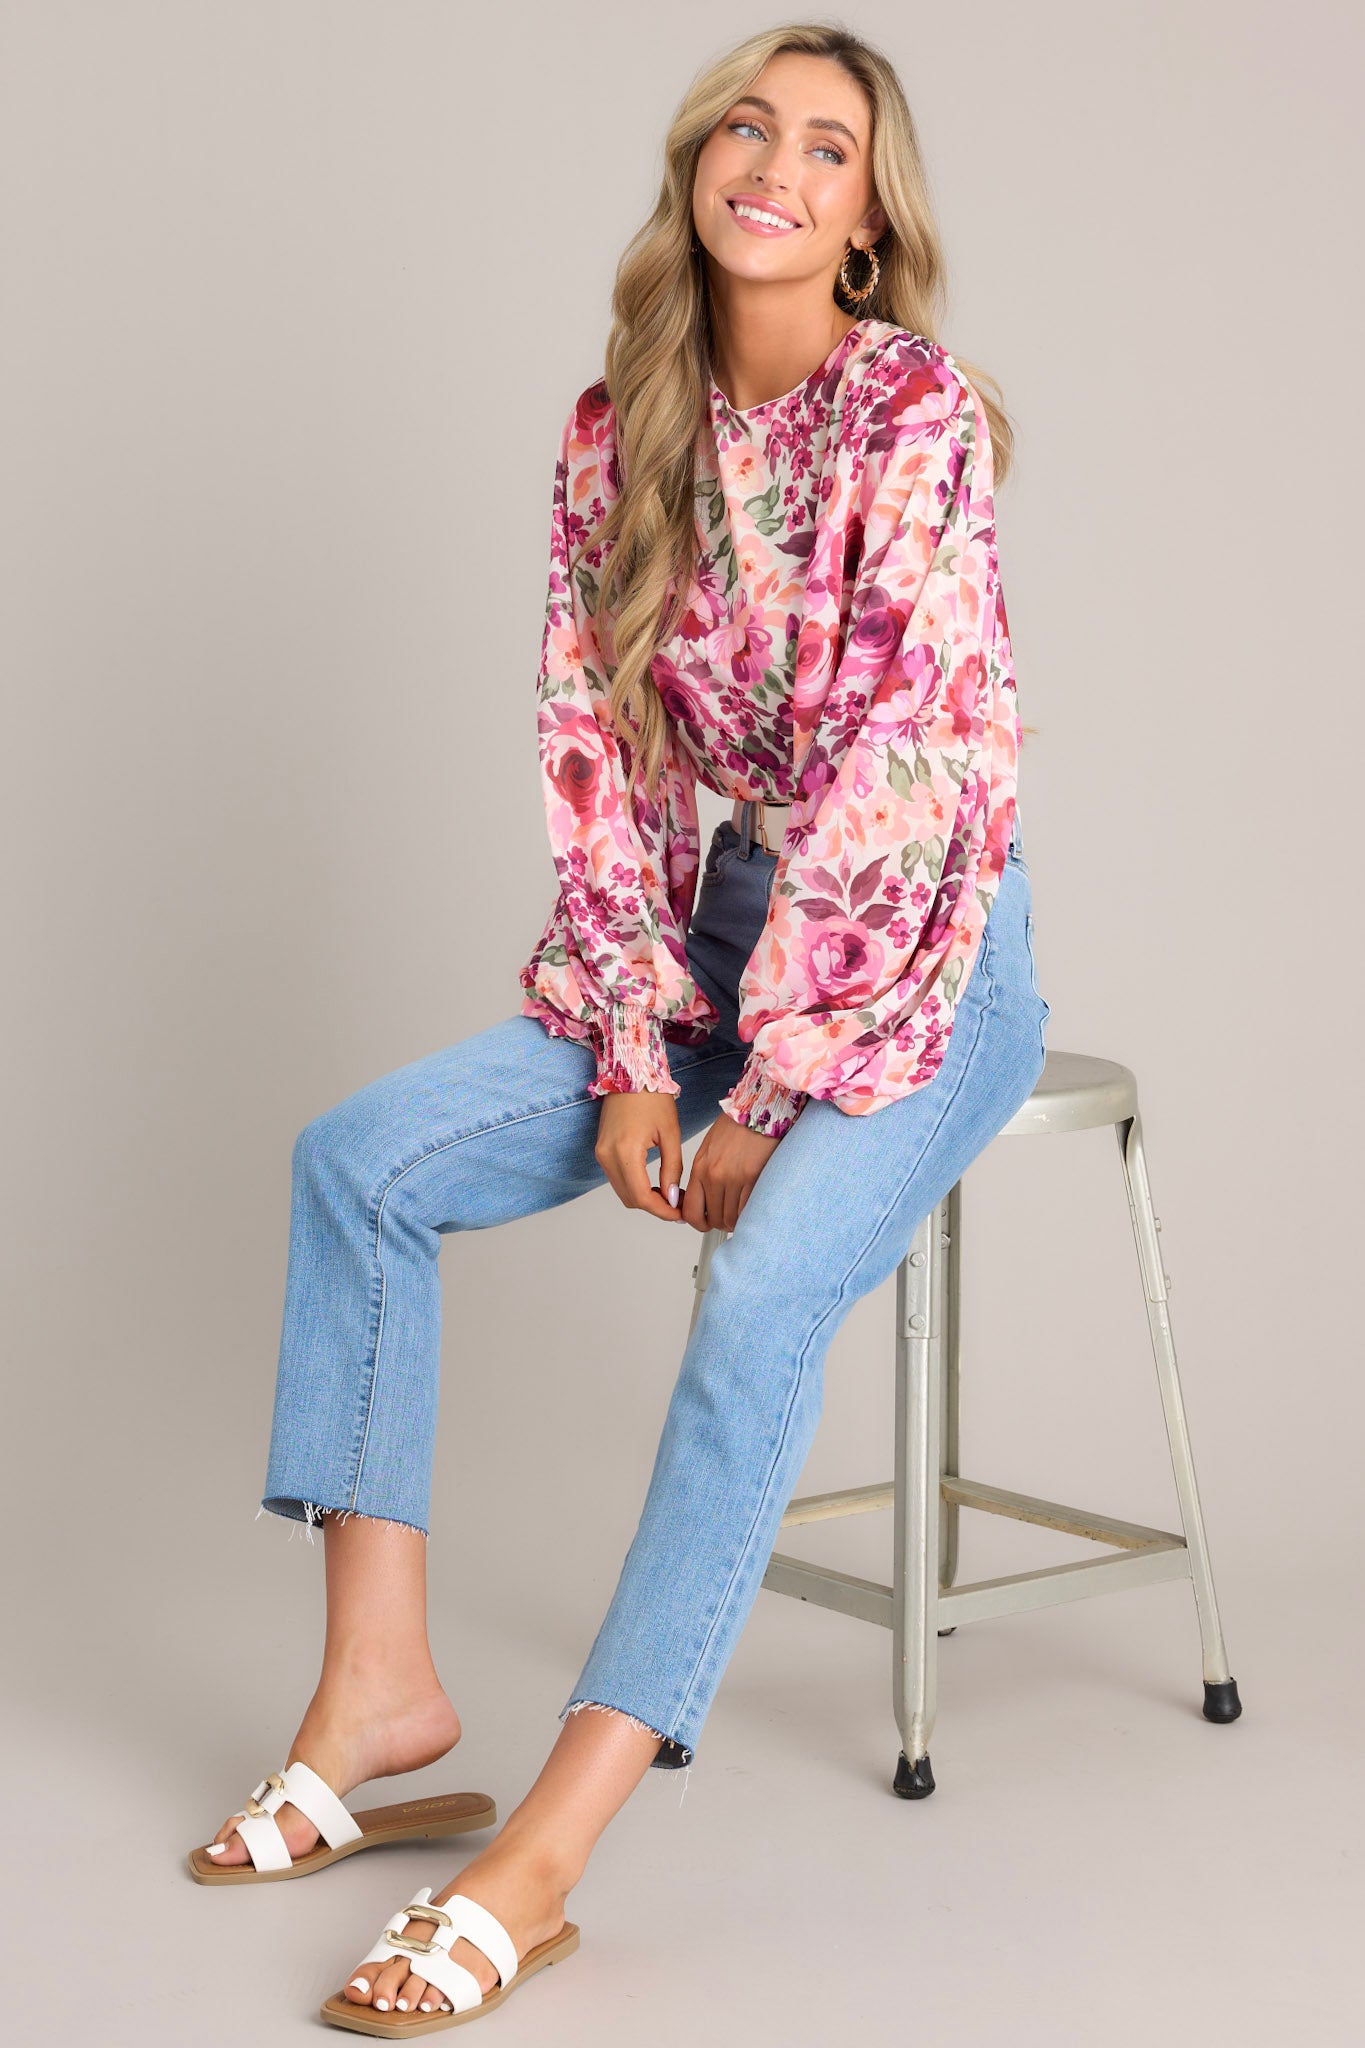 Seated Full length view of a top with a round neckline, a keyhole cutout at the back of the neck with a button closure, long sheer sleeves with smocked cuffs, and a vibrant floral pattern throughout